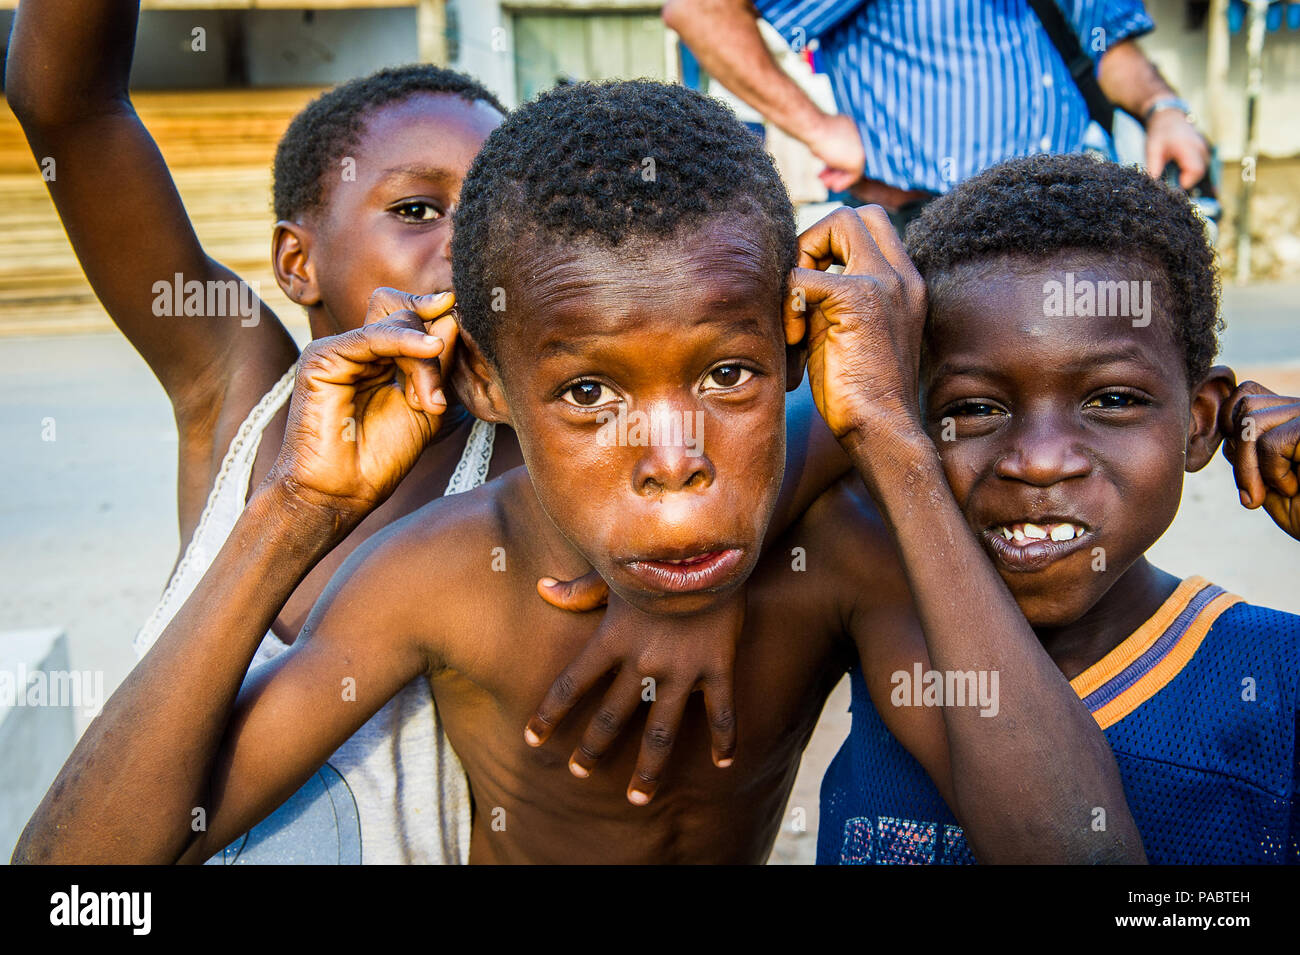 Accra Ghana March 3 2012 Unidentified Ghanaian Children Have Fun And Smile For The Camera In Ghana People Of Ghana Suffer Of Poverty Due To The Stock Photo Alamy